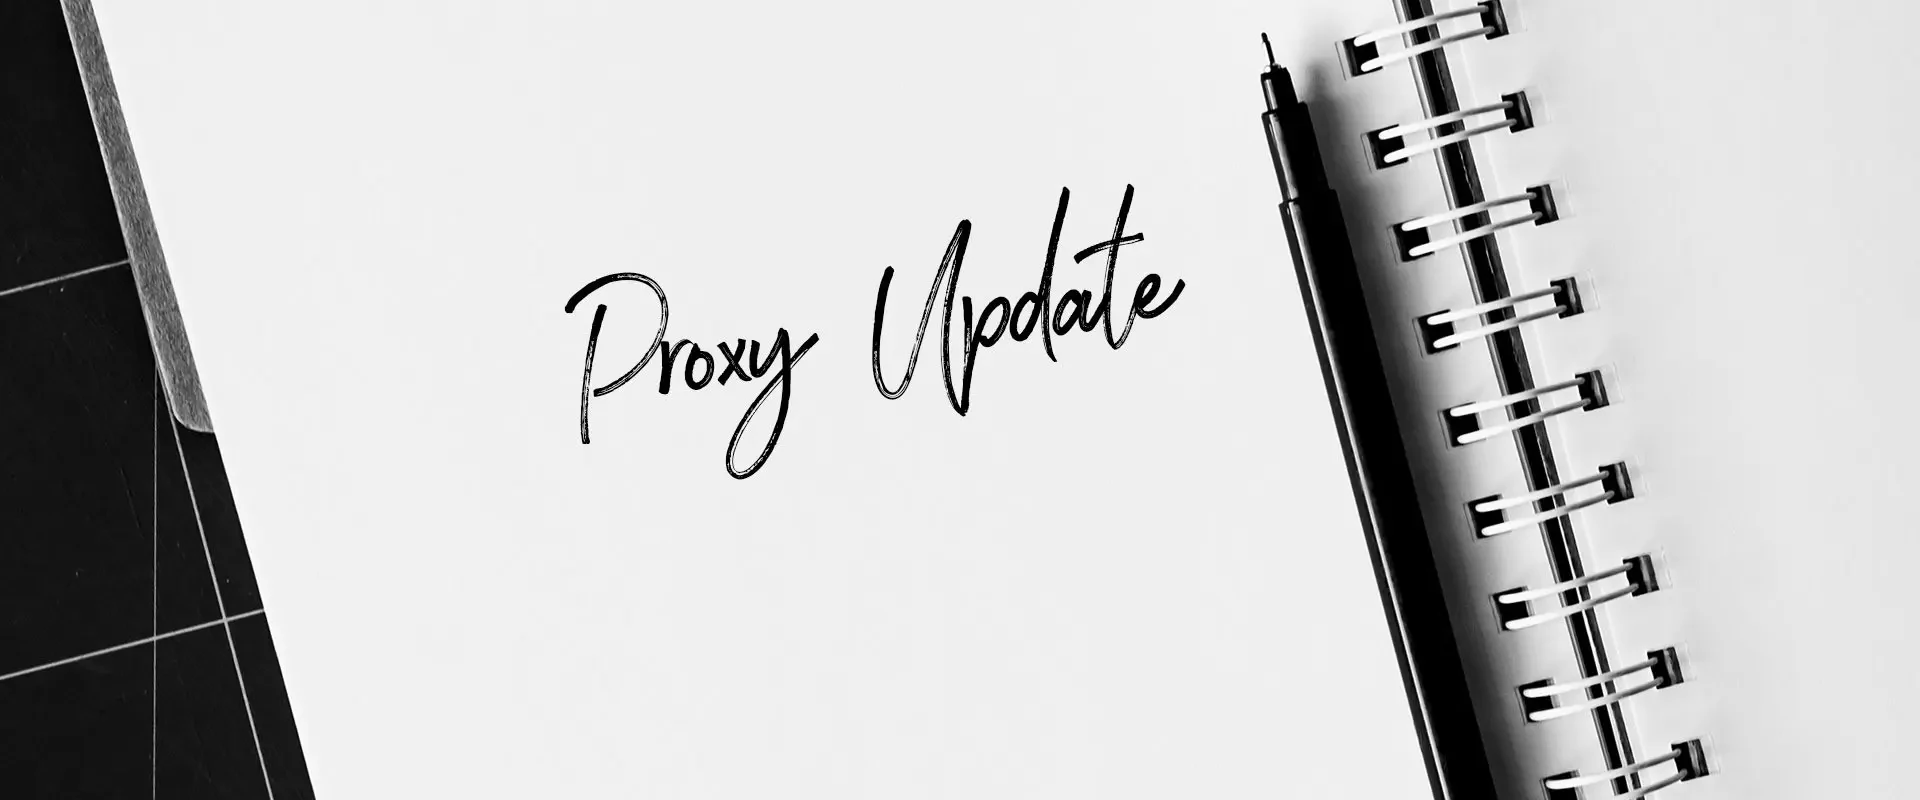 Proxy Update: ISS COMMENT PERIOD FOR PROPOSED BENCHMARK POLICY CHANGES